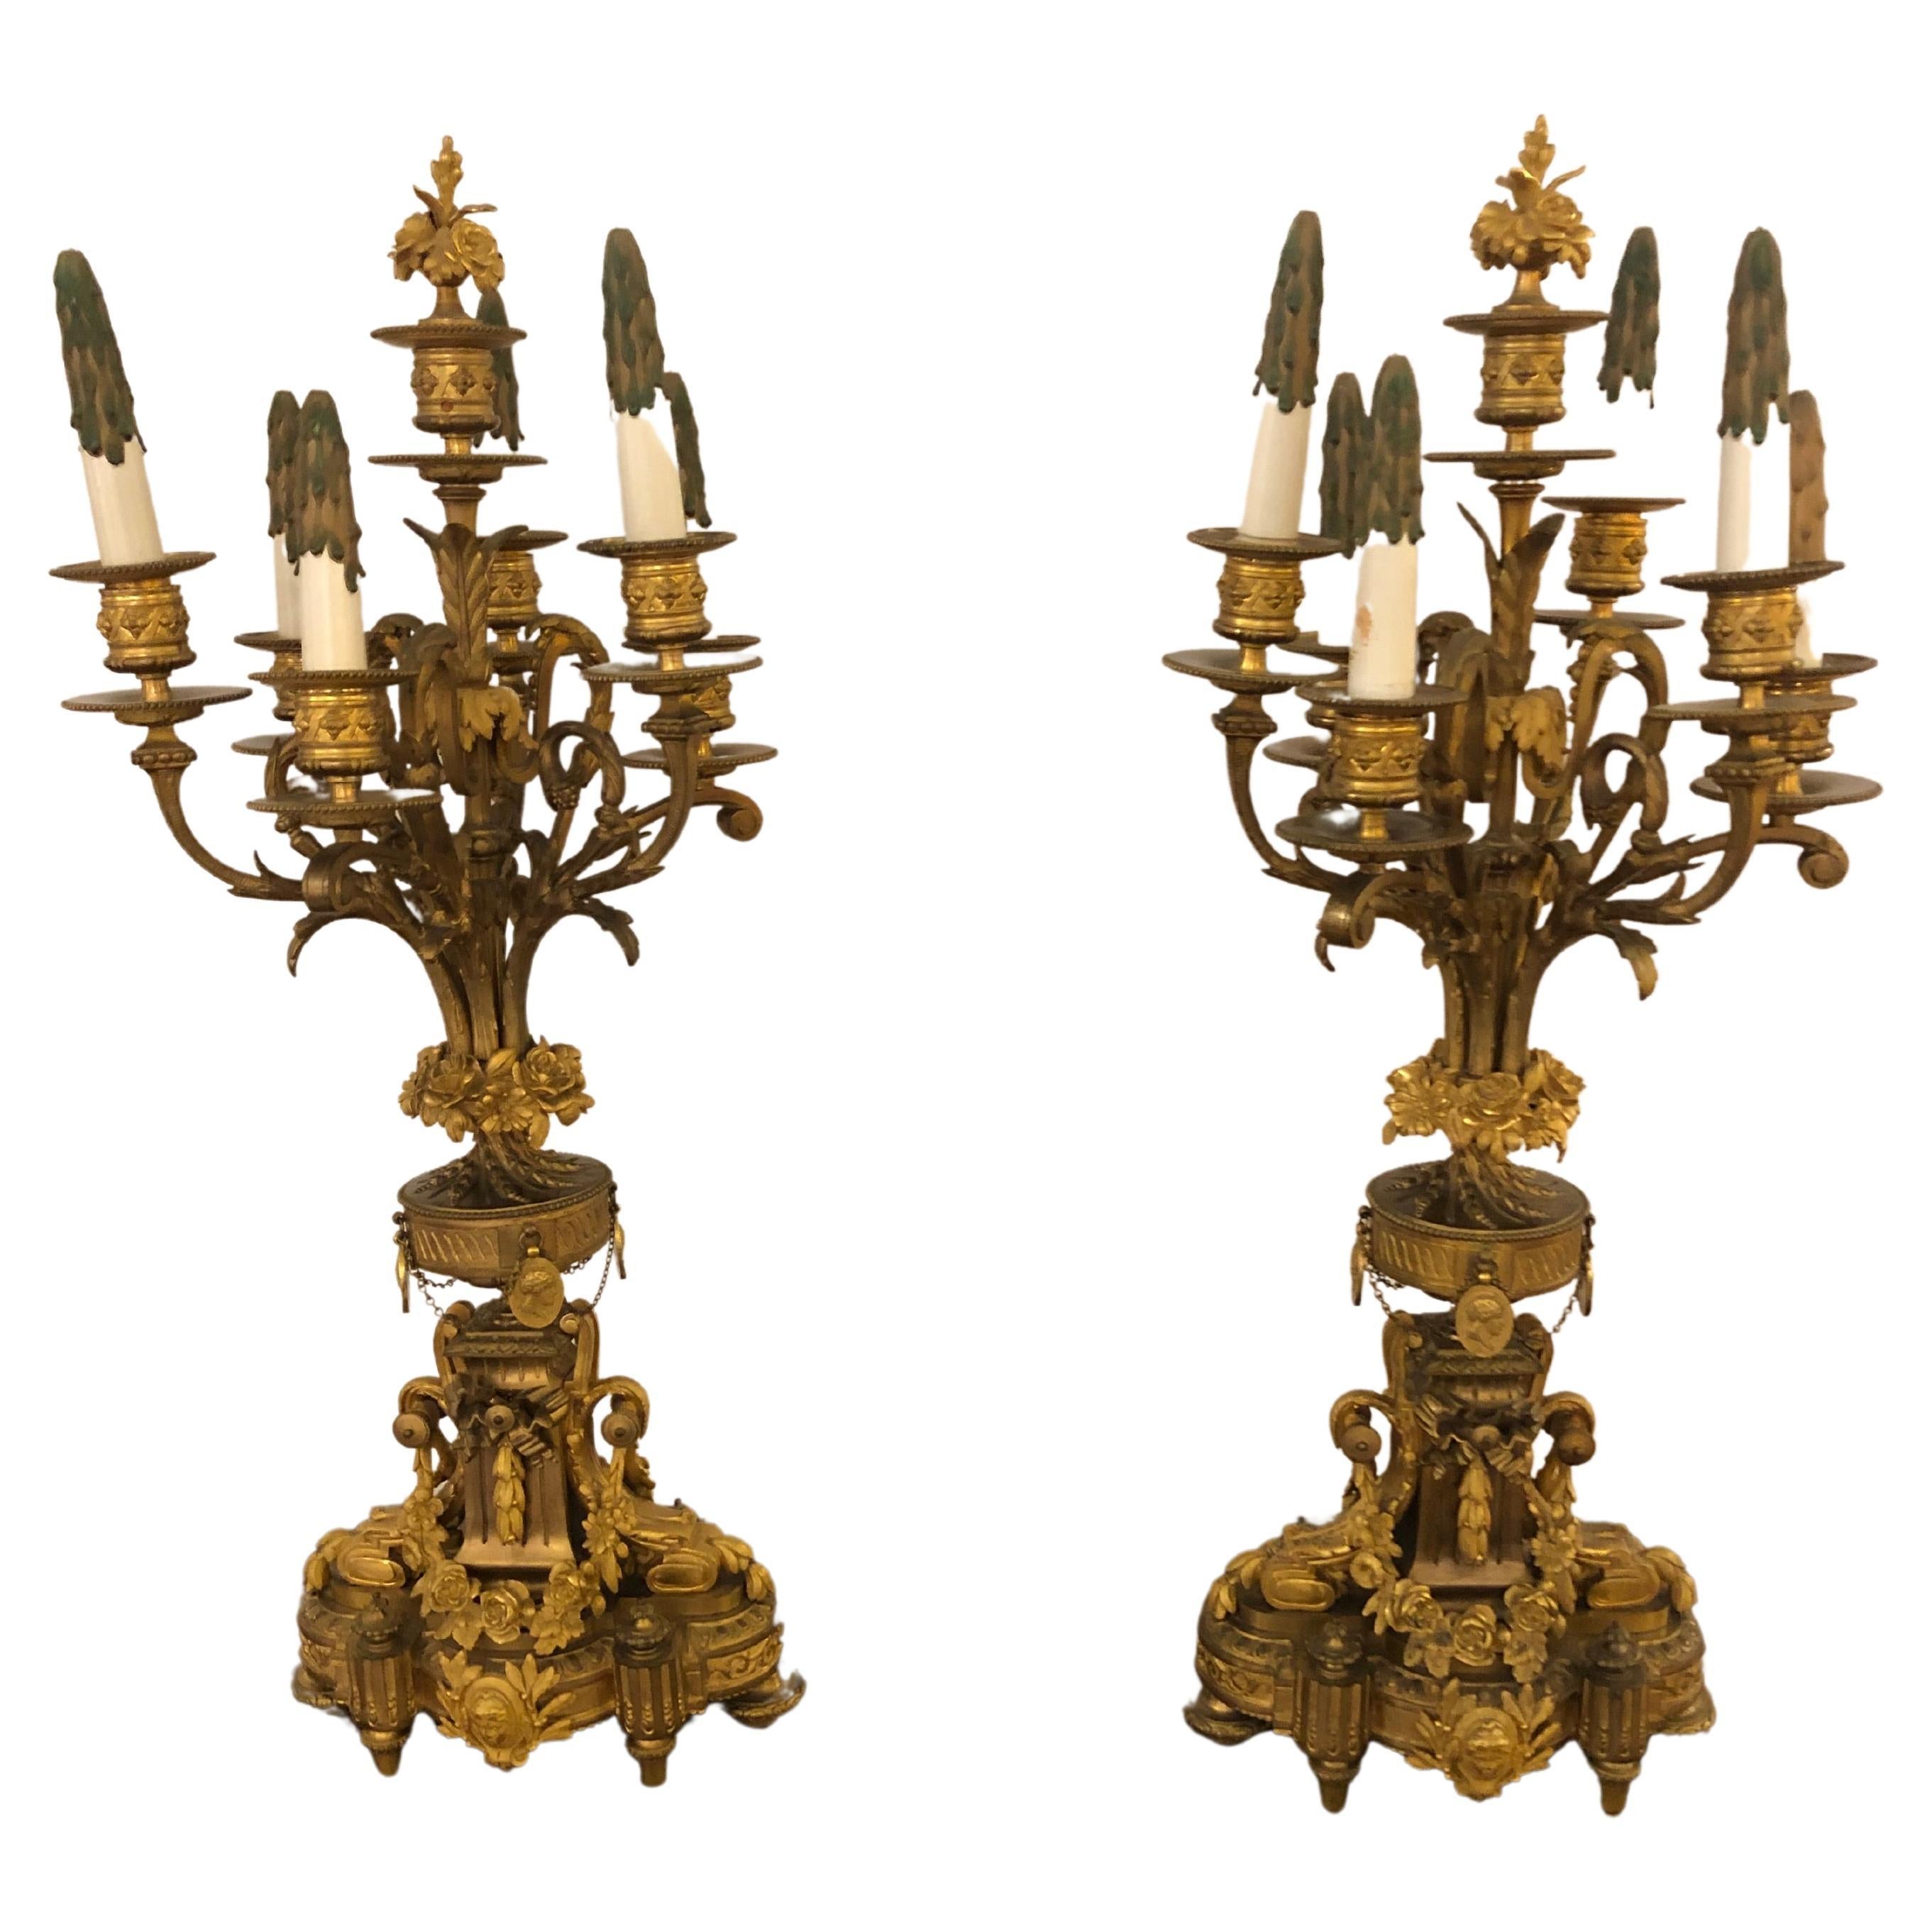 Magnificent Pair of Neoclassical Cast & Gilt Bronze Relief Ornate Candleabras For Sale